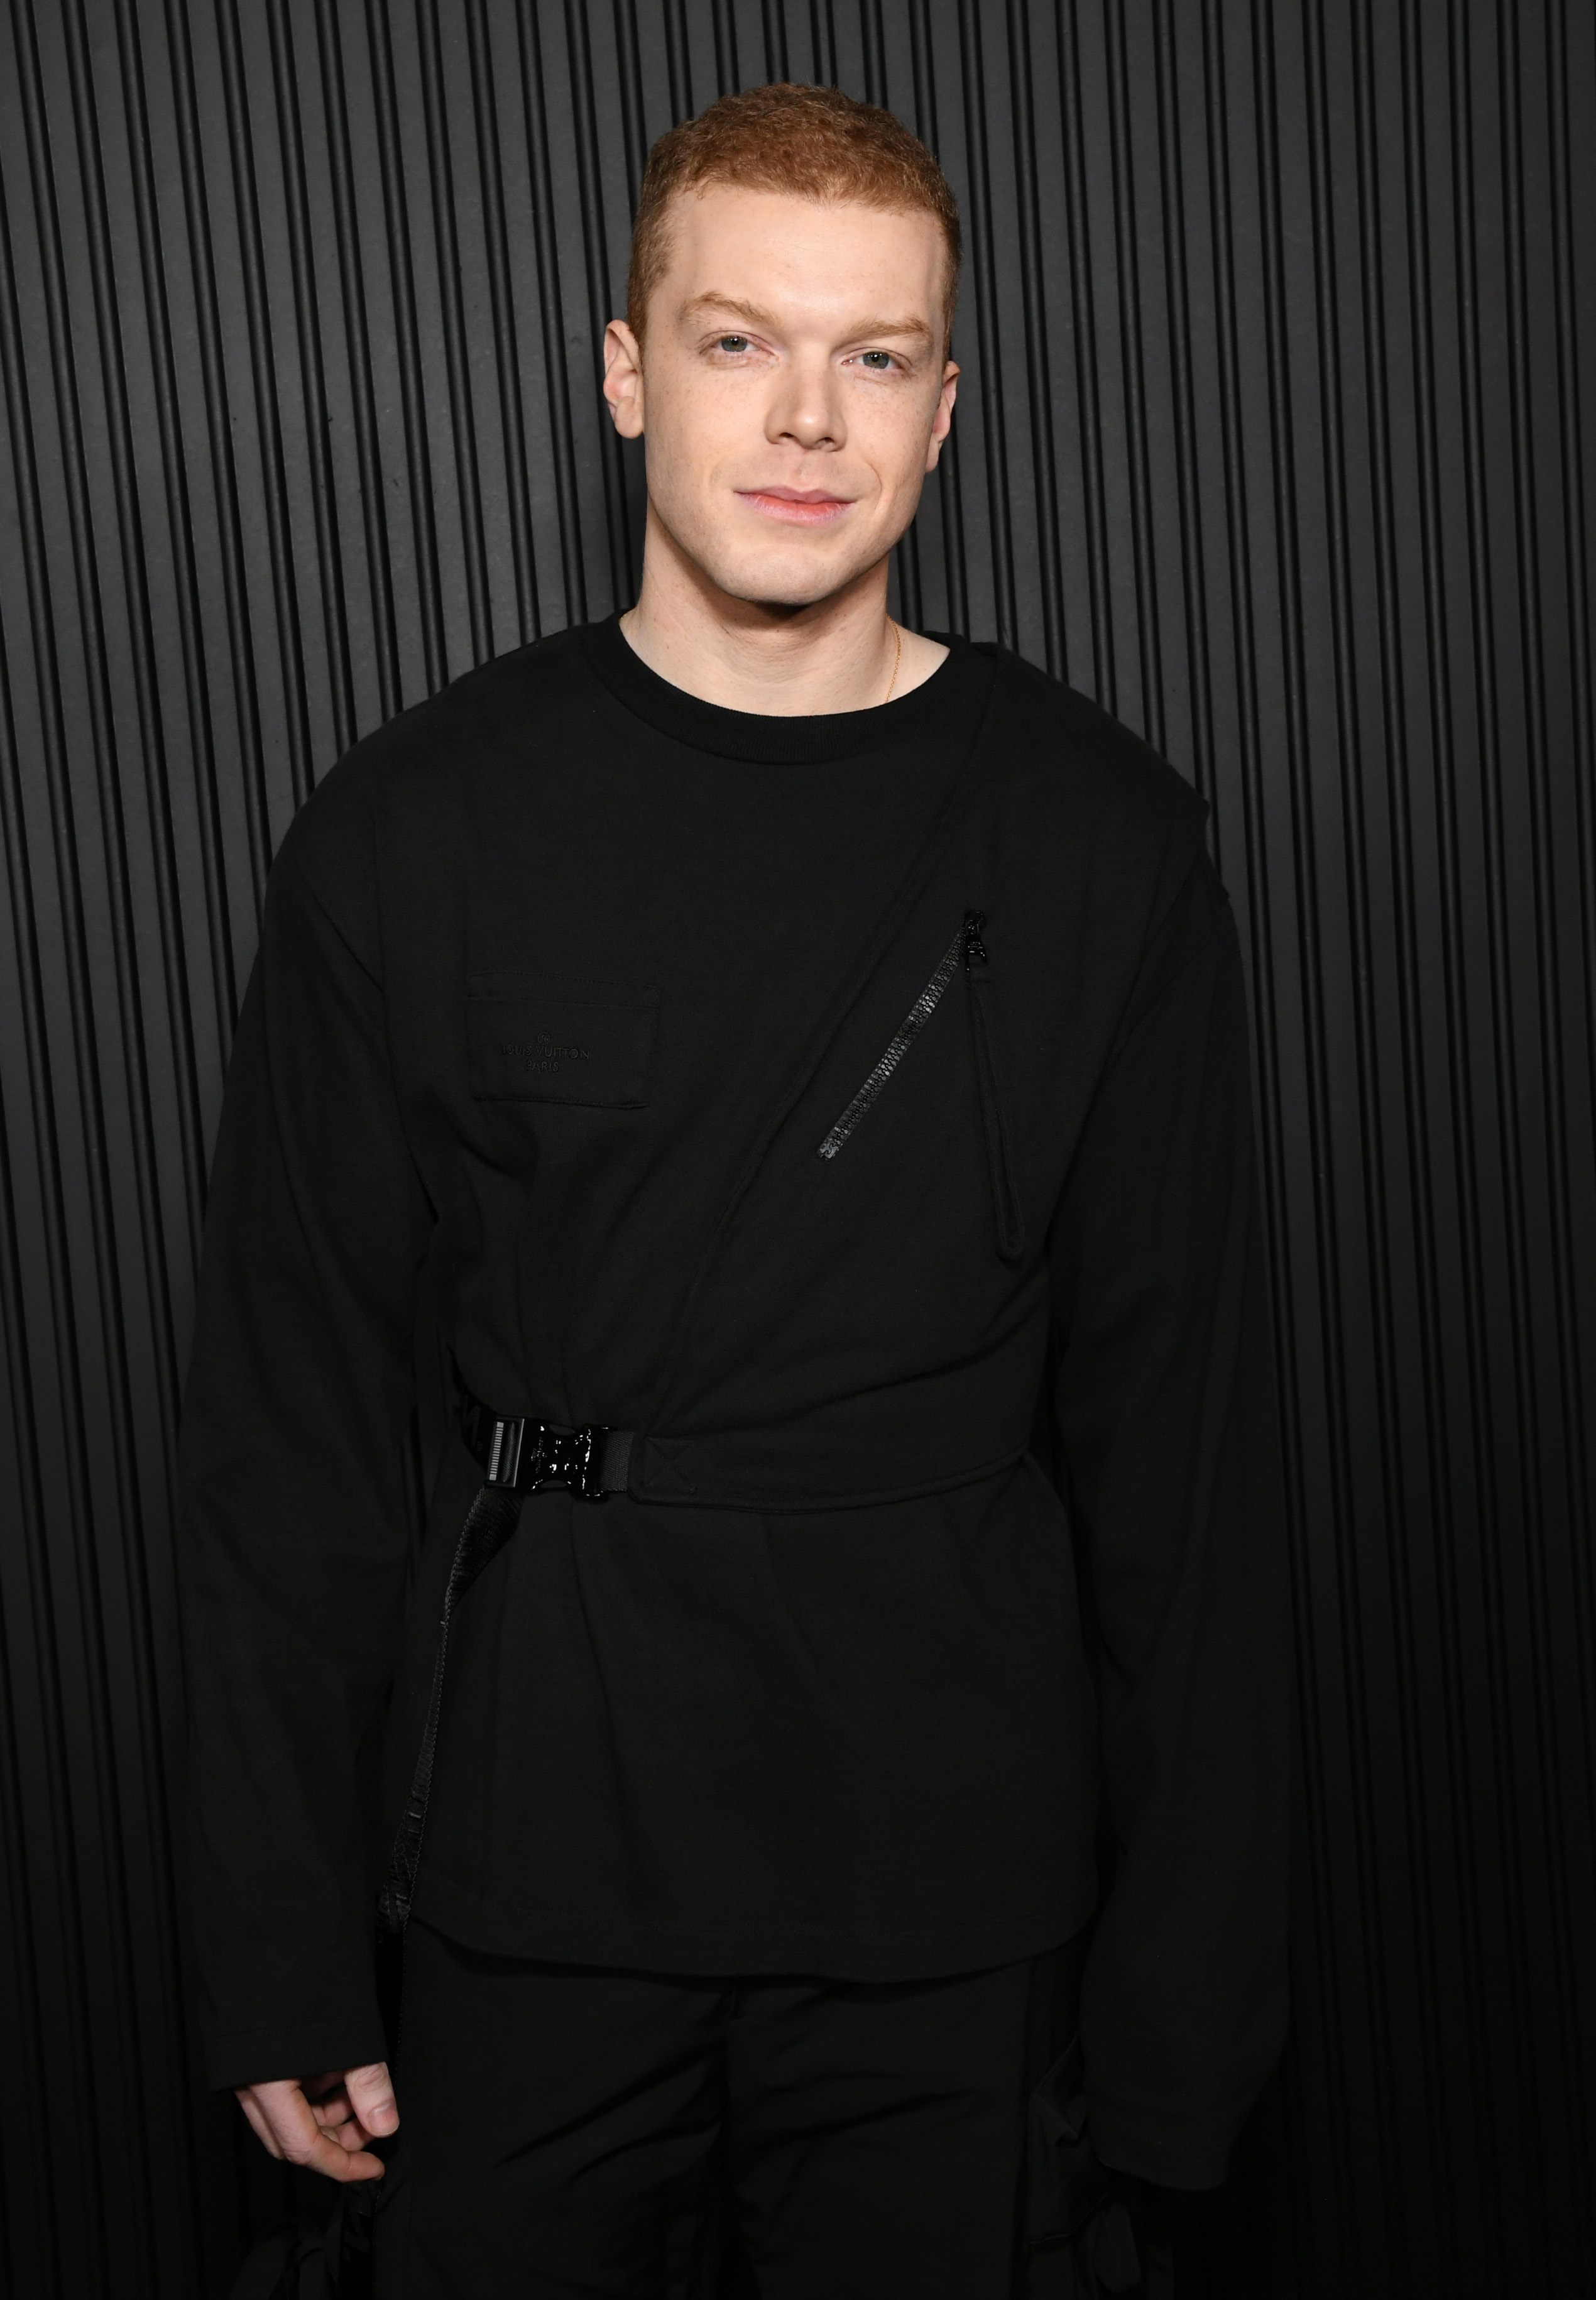 Cameron Monaghan at the Vanity Fair Campaign Hollywood and TikTok Celebrate Vanities: A Night For Young Hollywood on March 08, 2023, in Los Angeles, California. | Source: Getty Images